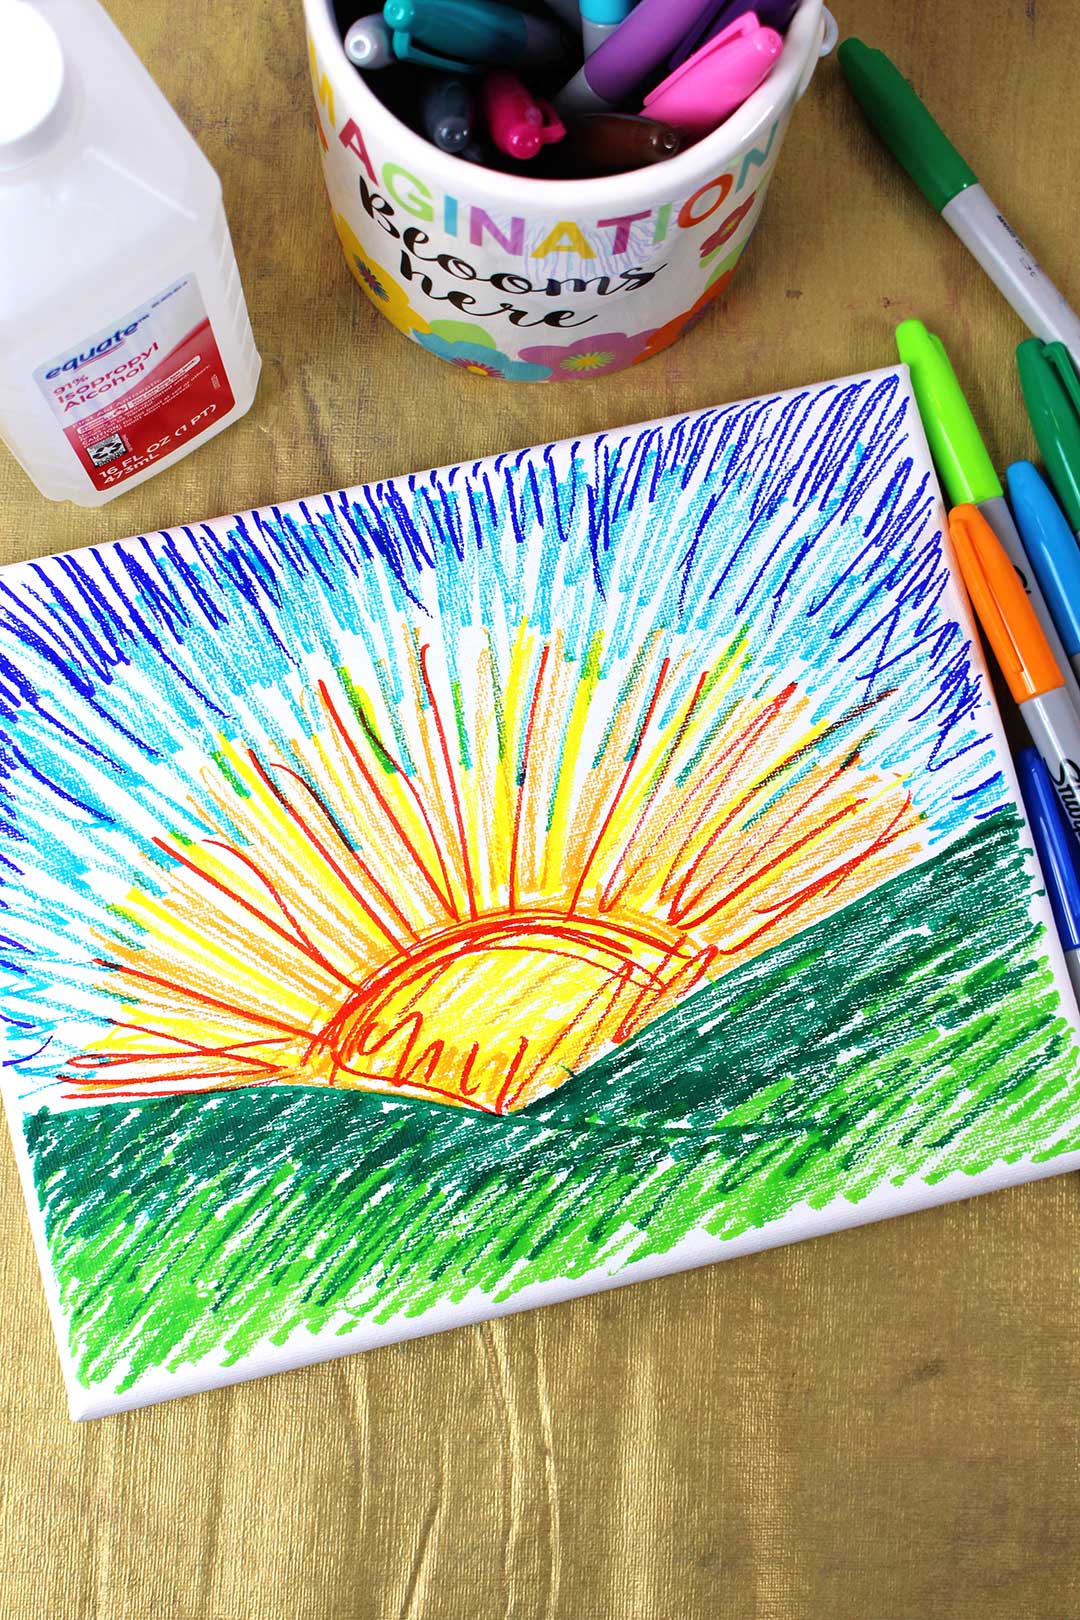 A sunset drawn with colorful sharpie markers on canvas.